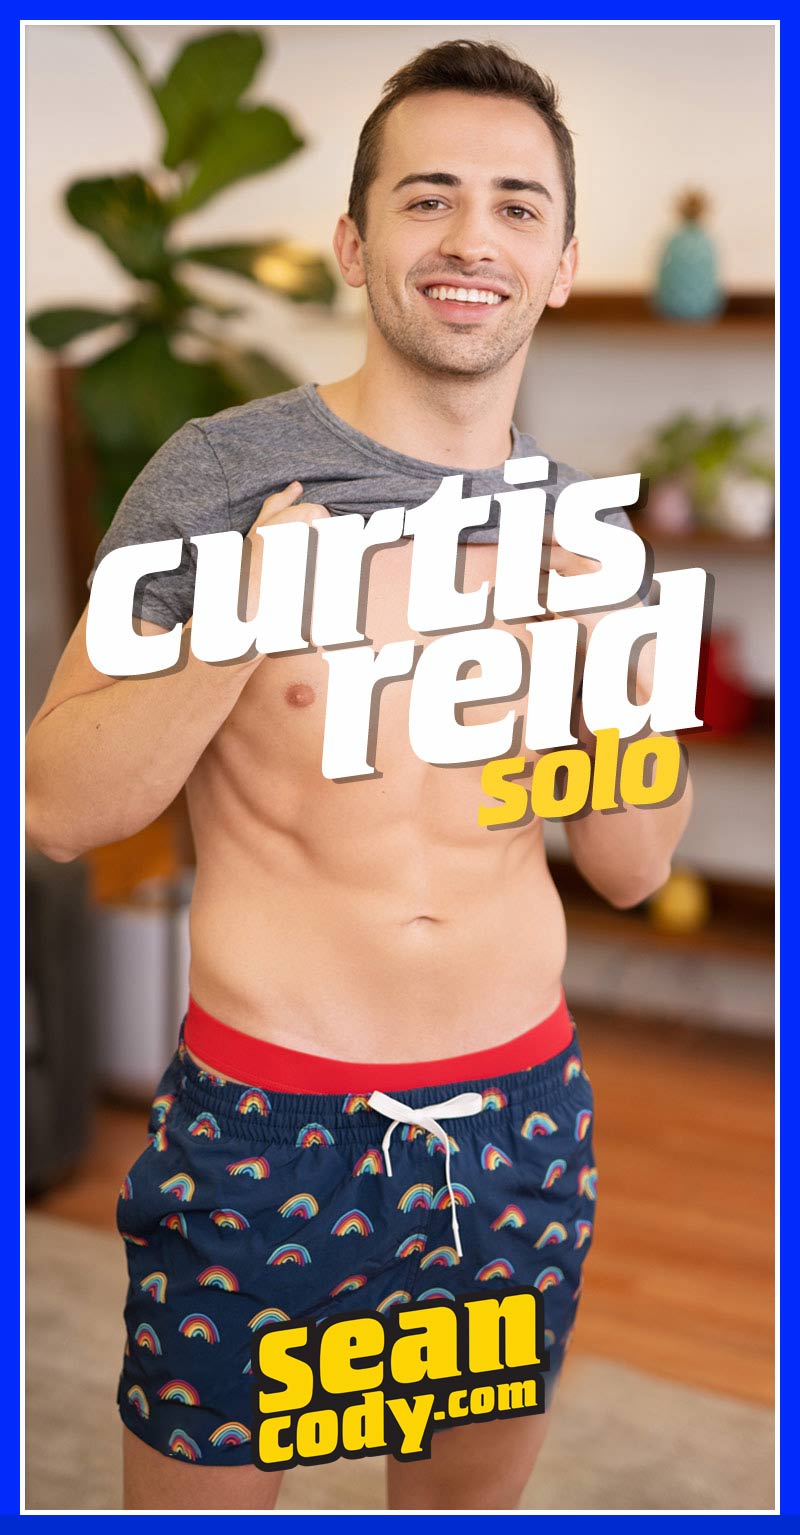 Curtis Reid [Introductory Solo] at SeanCody